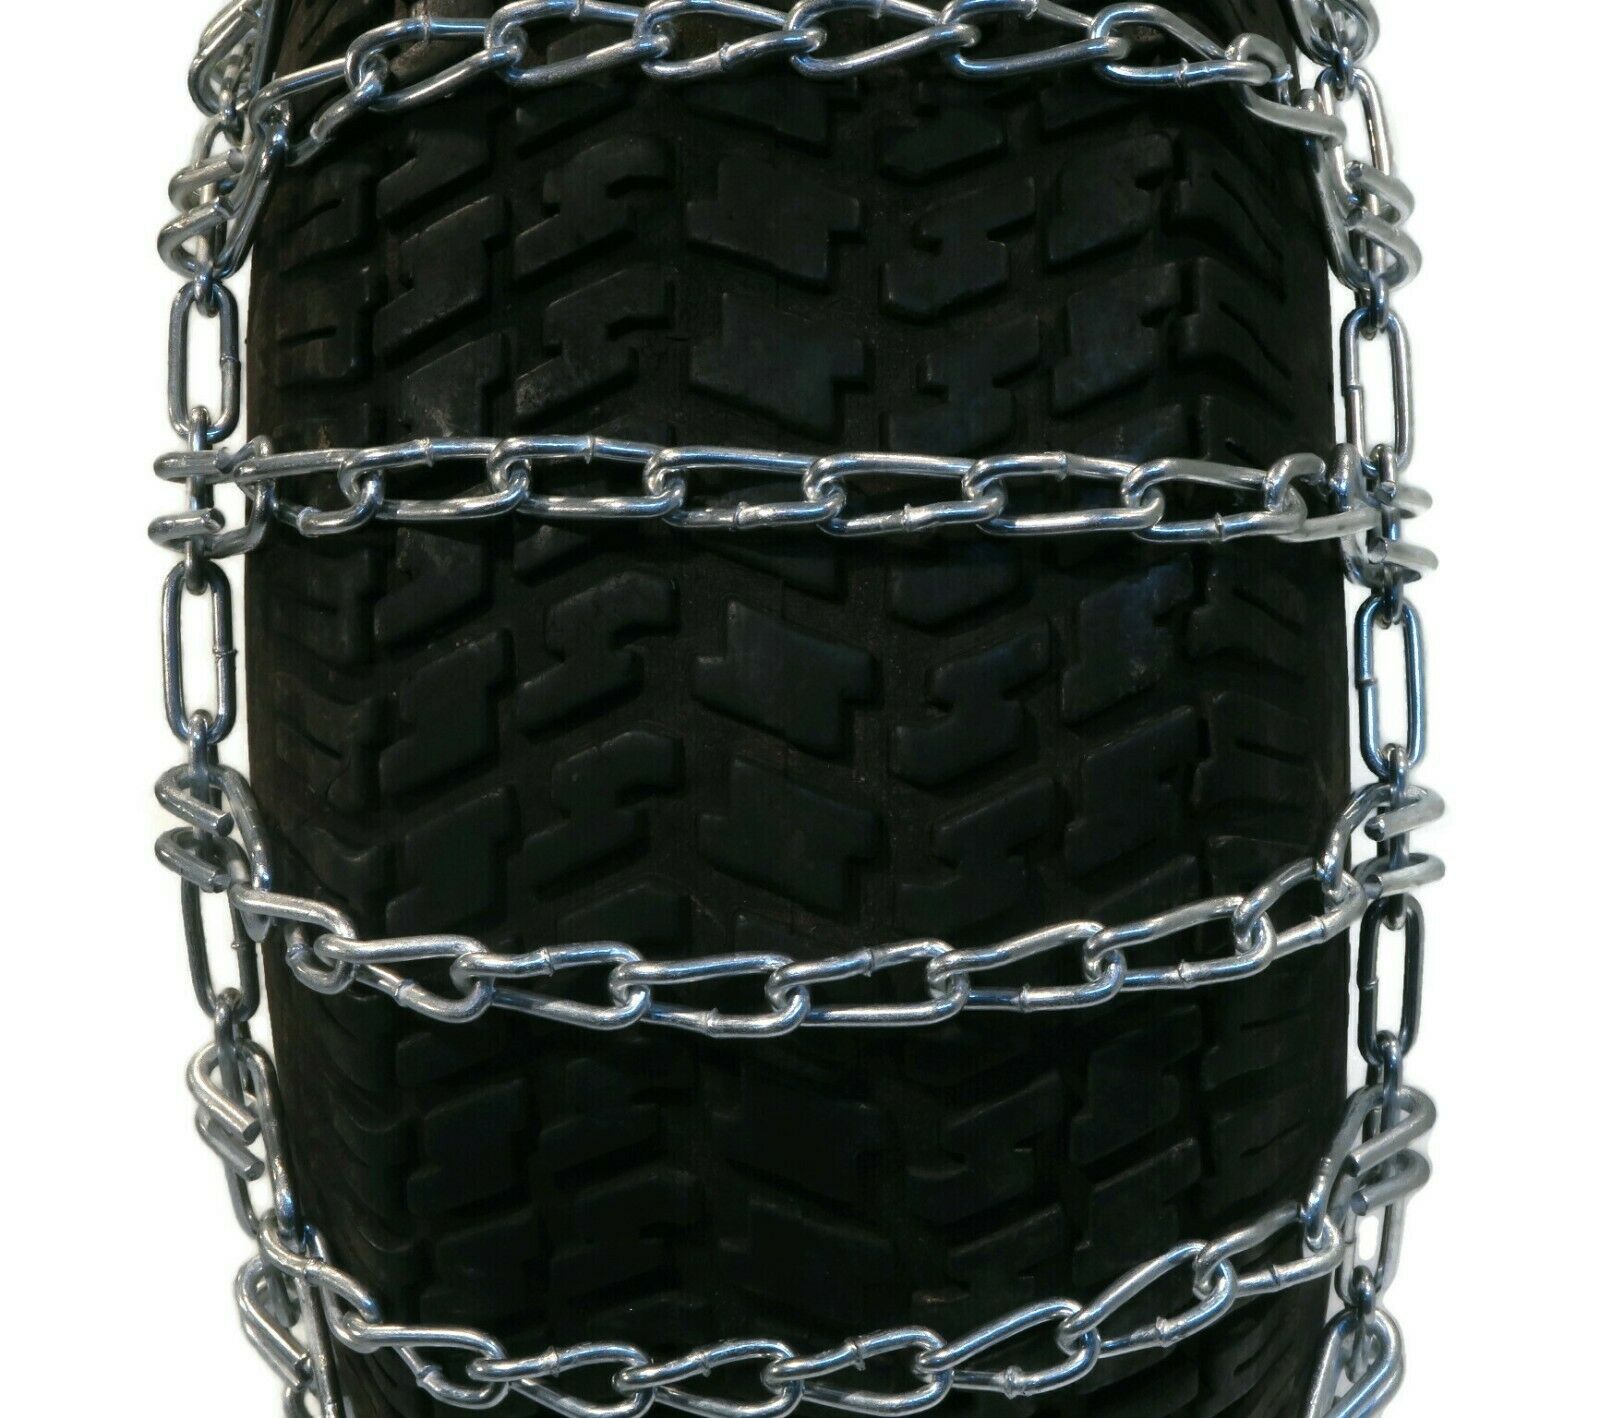 Pair 2 Link Tire Chains 26x12-12 for John Deere Lawn Mower Tractor Rider - image 5 of 6